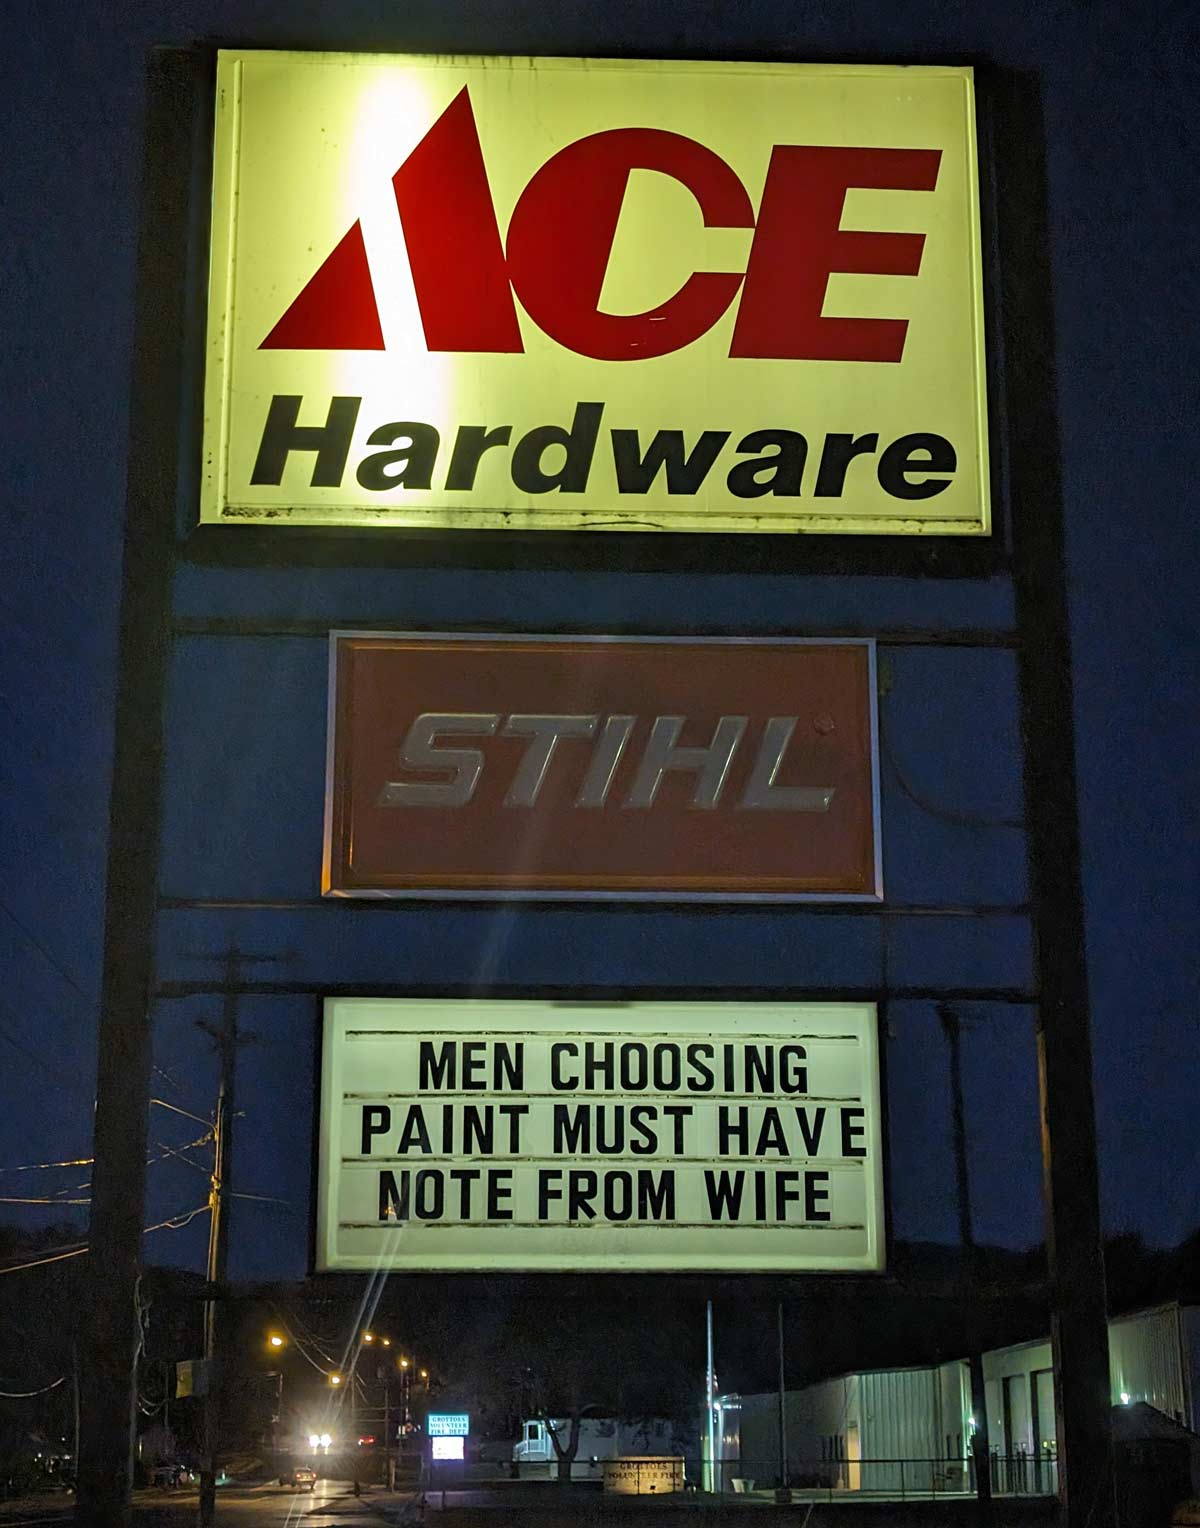 New policy at the local hardware store